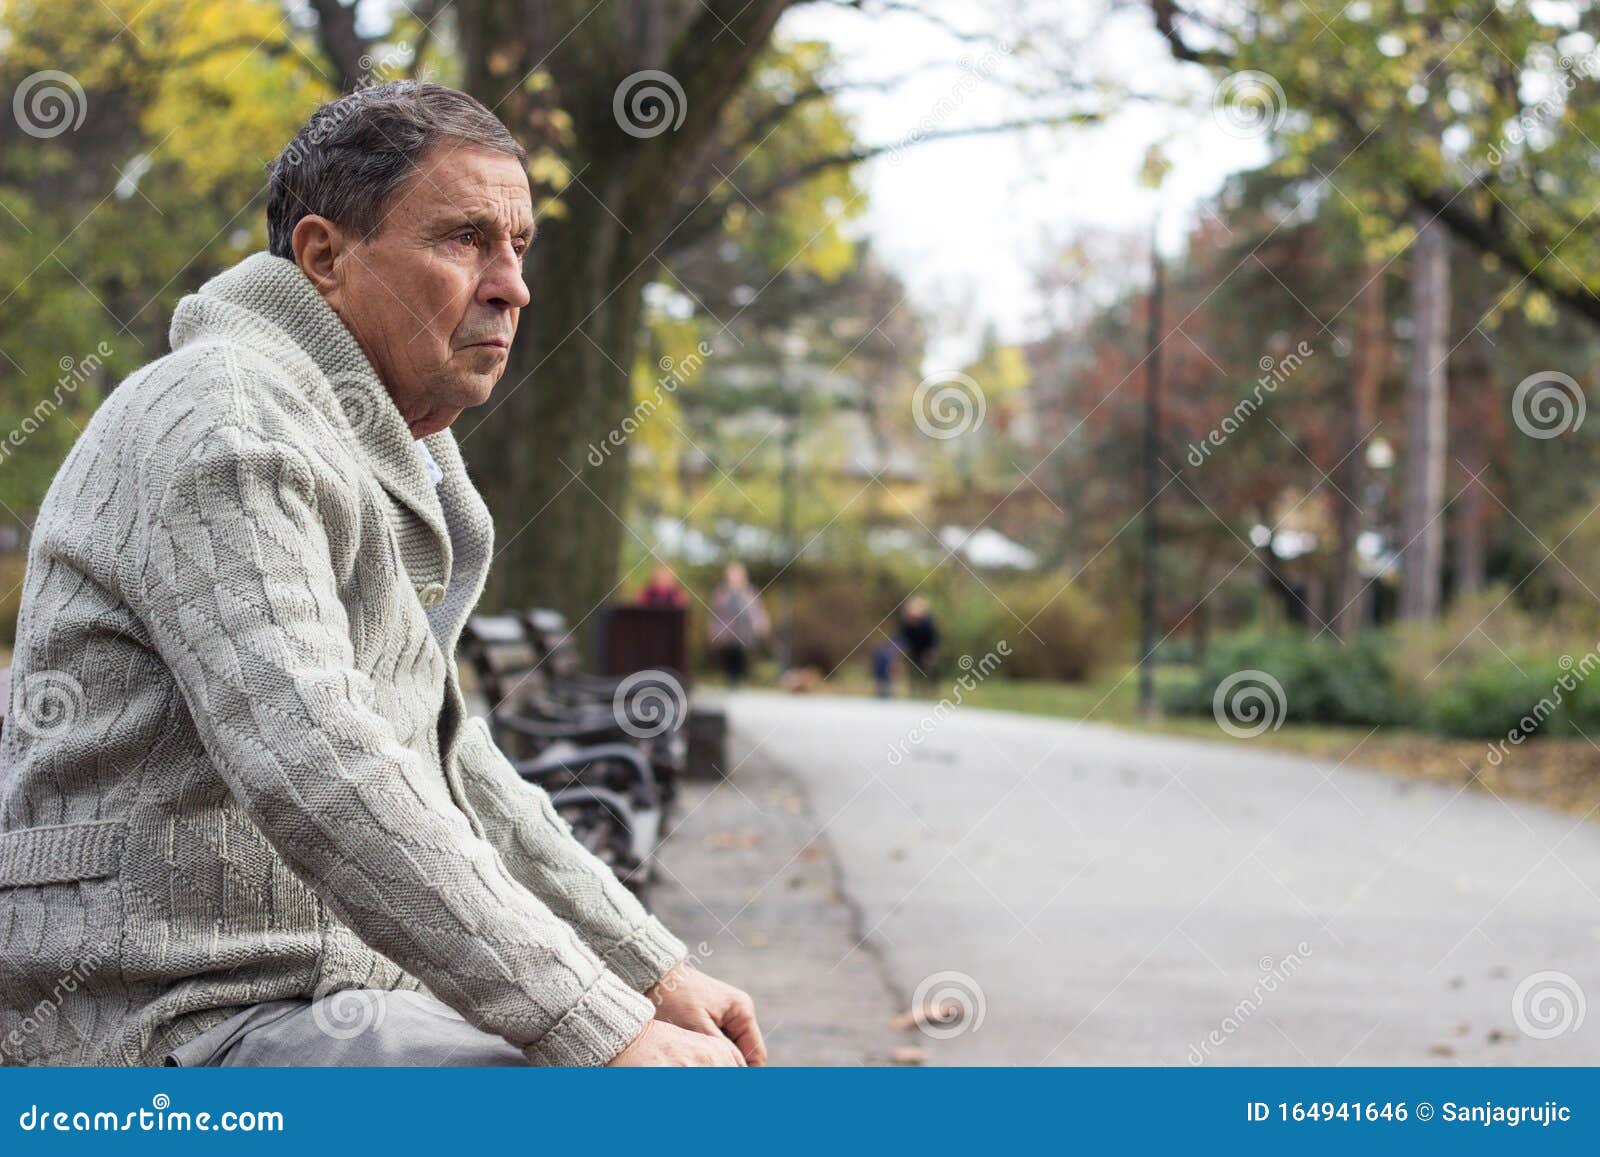 Senior Man Sitting on Bench in the Park Stock Photo - Image of ...